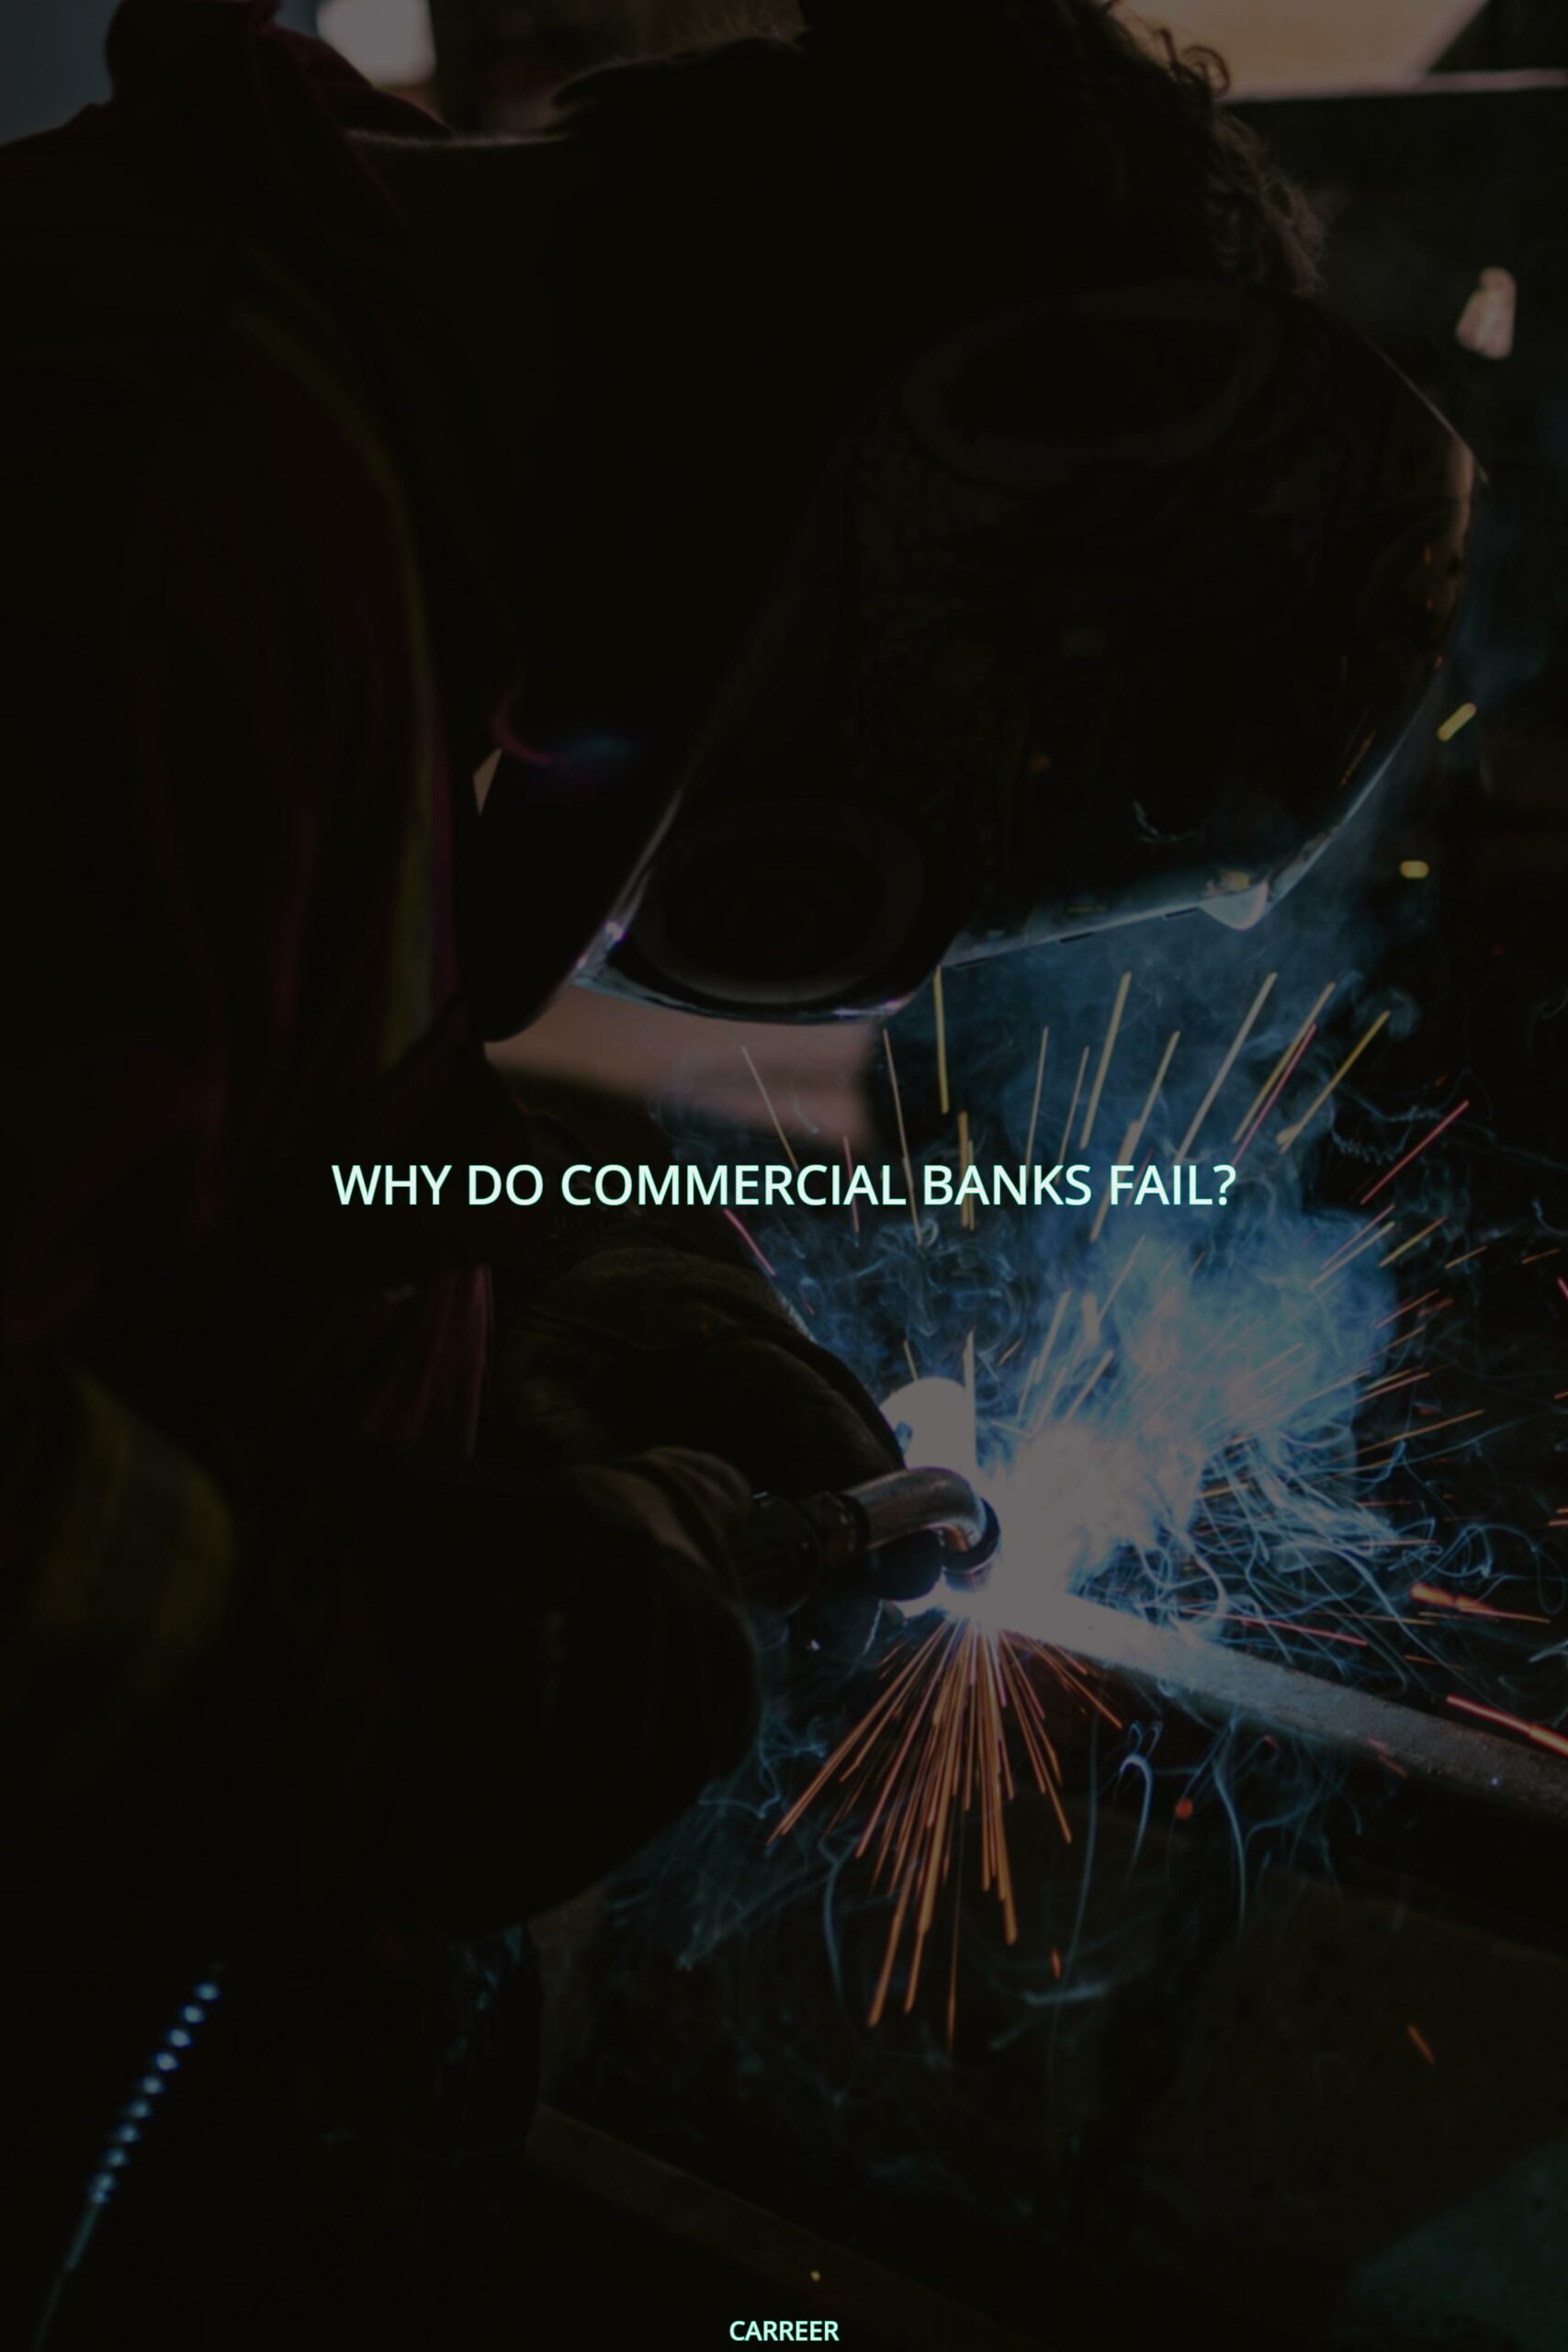 Why do commercial banks fail?